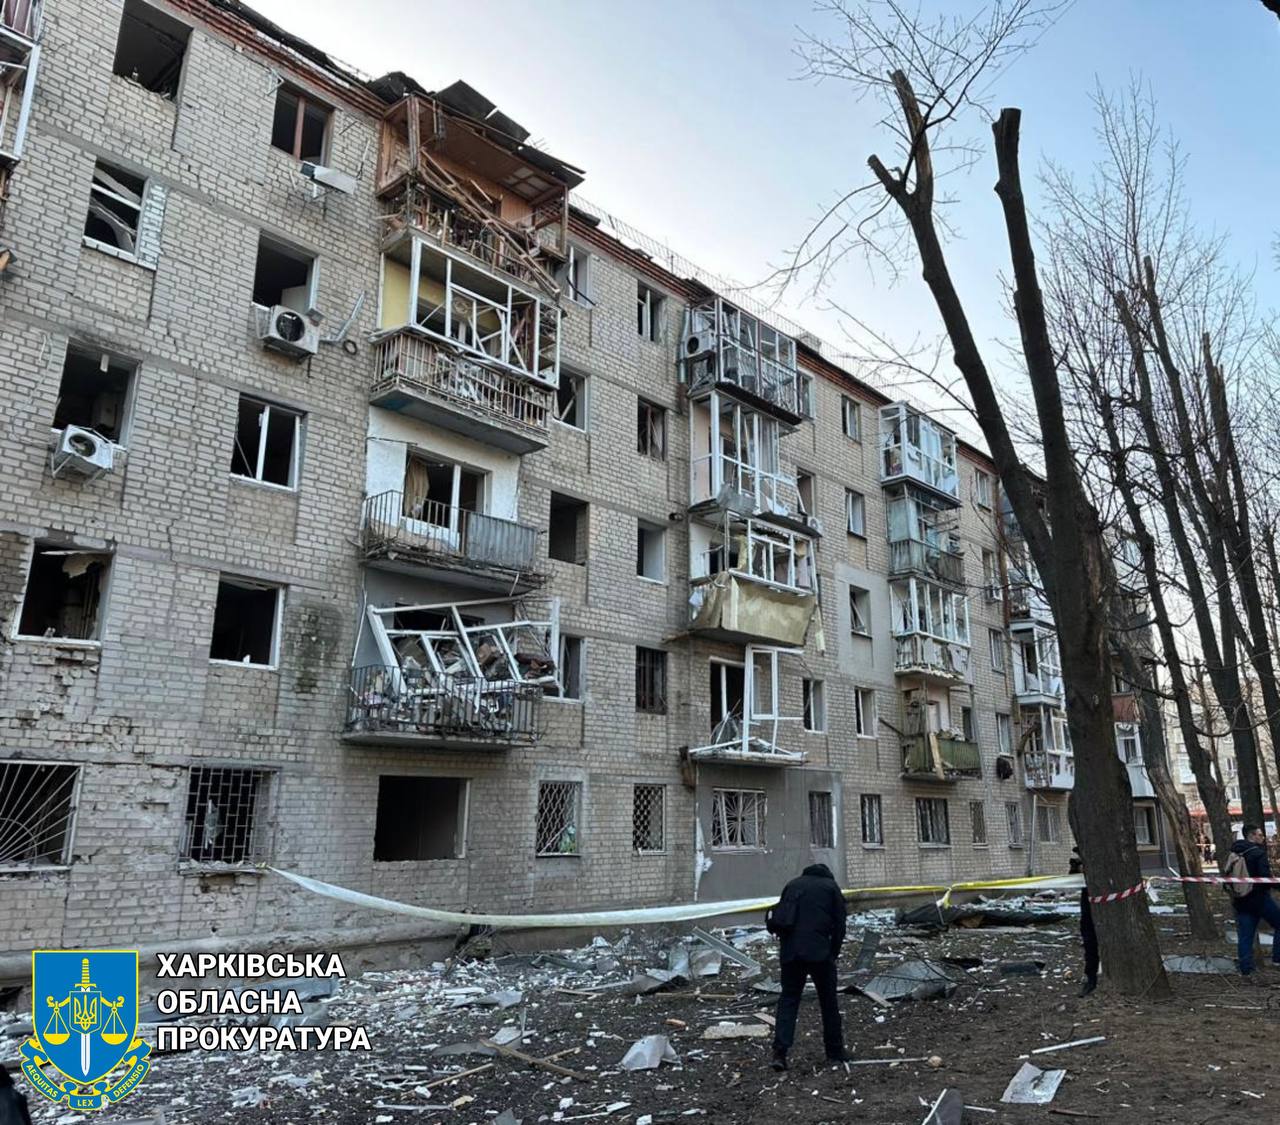 Update: Russian attack on Kharkiv residential area kills 1, injures at least 19, including children